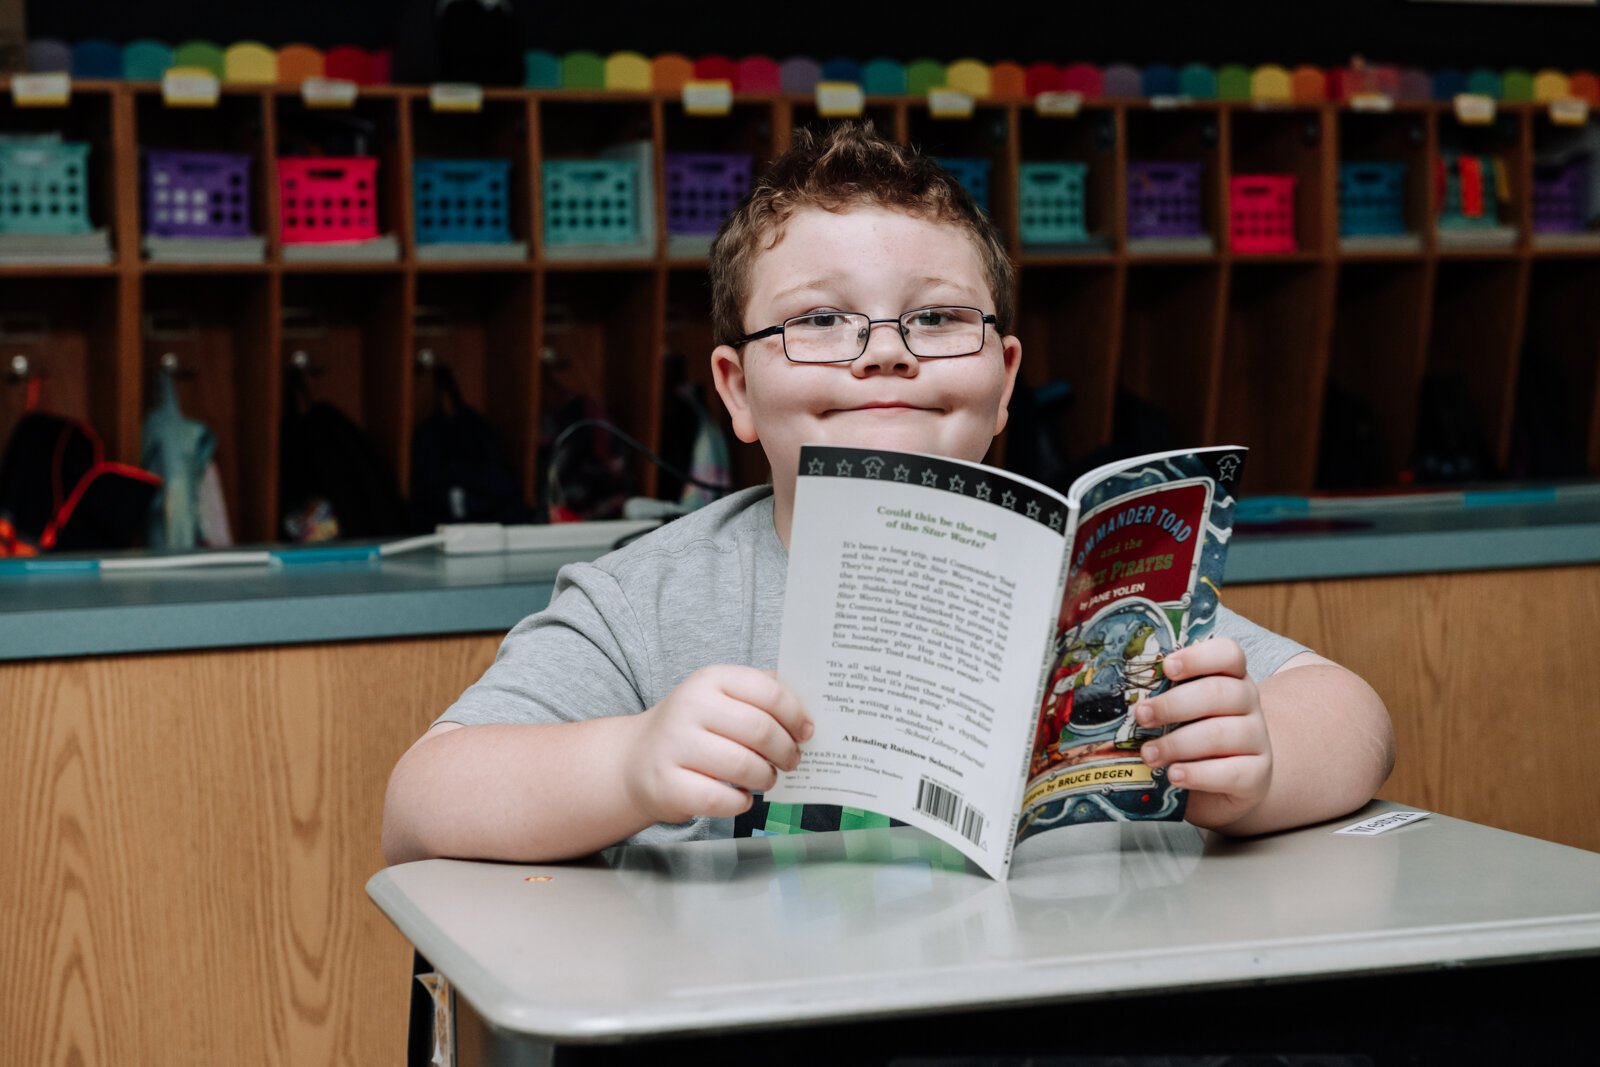 Westyn Stevens poses with his book during reading time in teacher Stacey Fry's class at O J Neighbours Elementary School in Wabash.